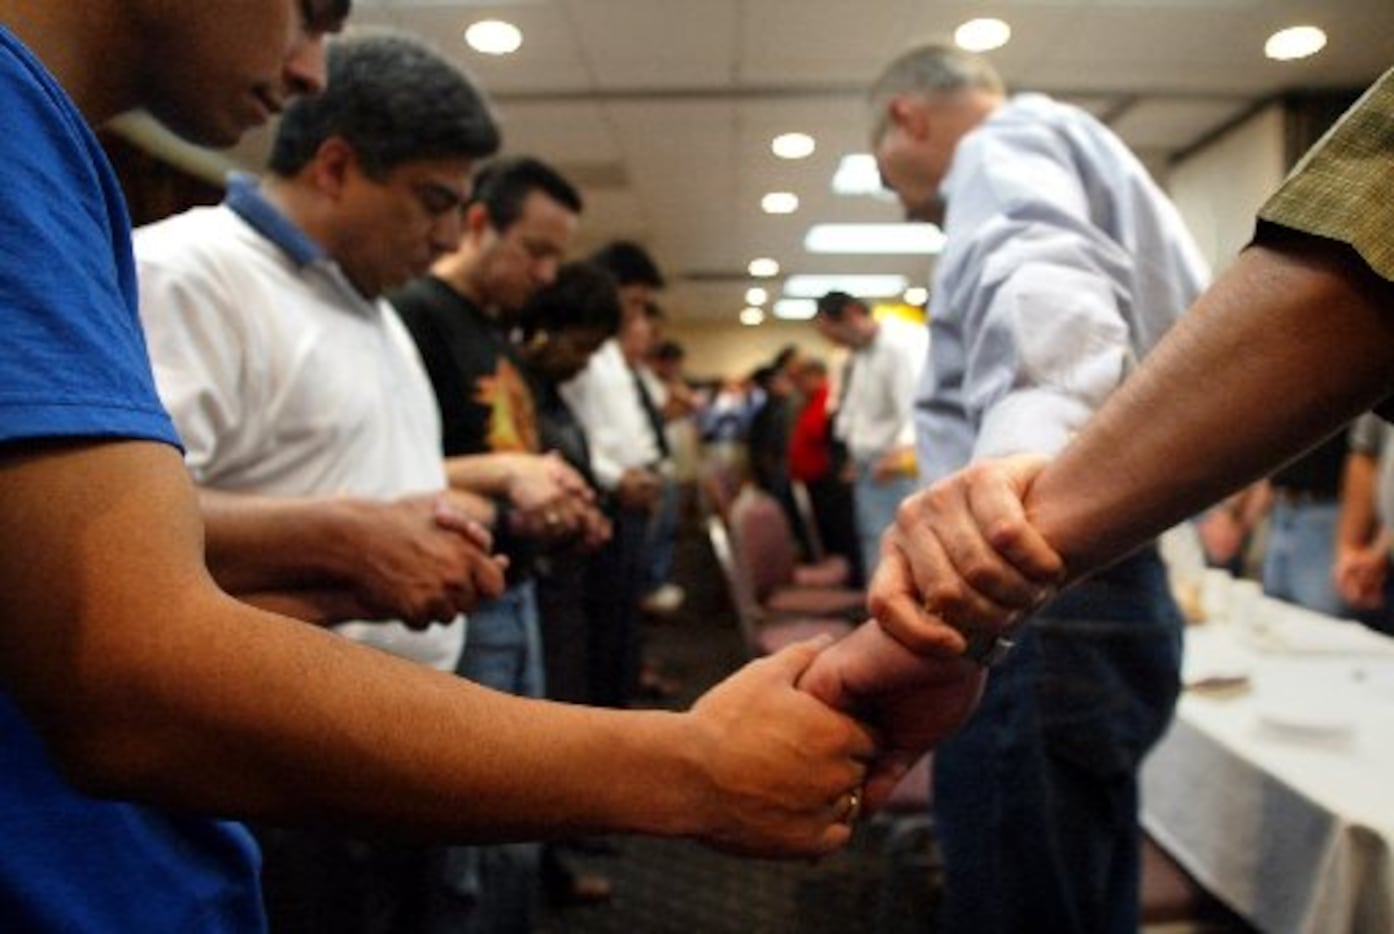 Texas state Democratic representatives held hands in prayer to open their morning session in...